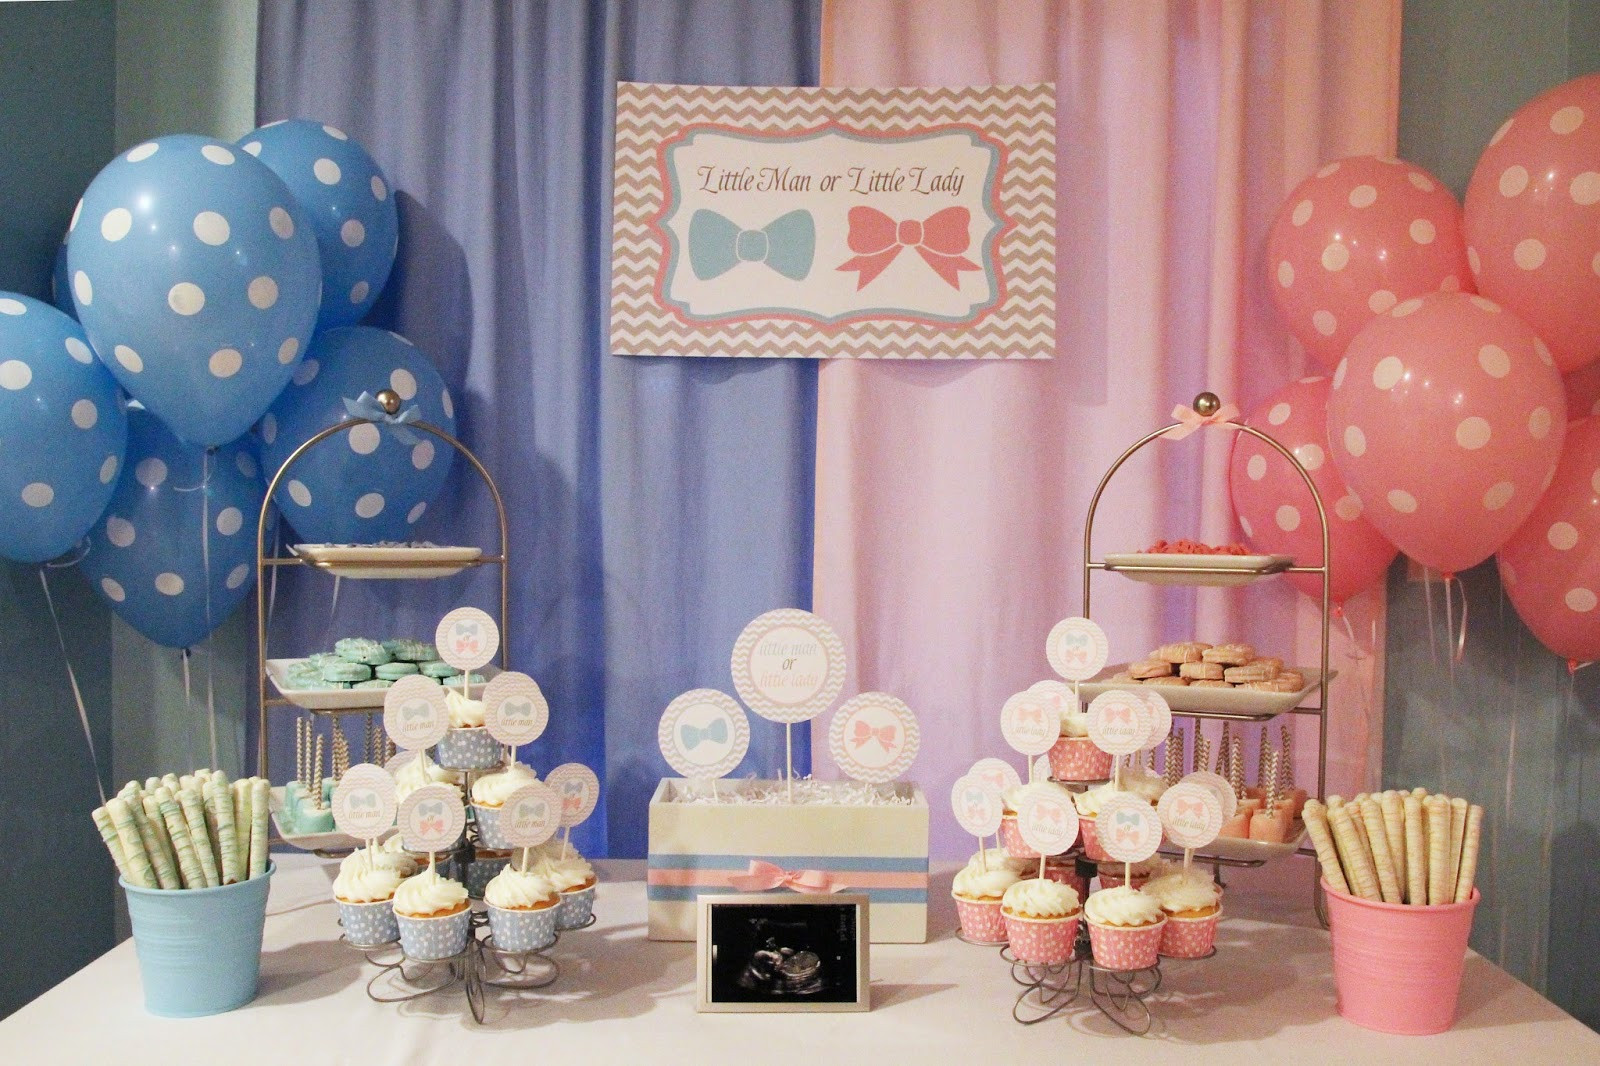 Ideas For Baby Gender Reveal Party
 5M Creations Gender Reveal Party Little Man or Little Lady